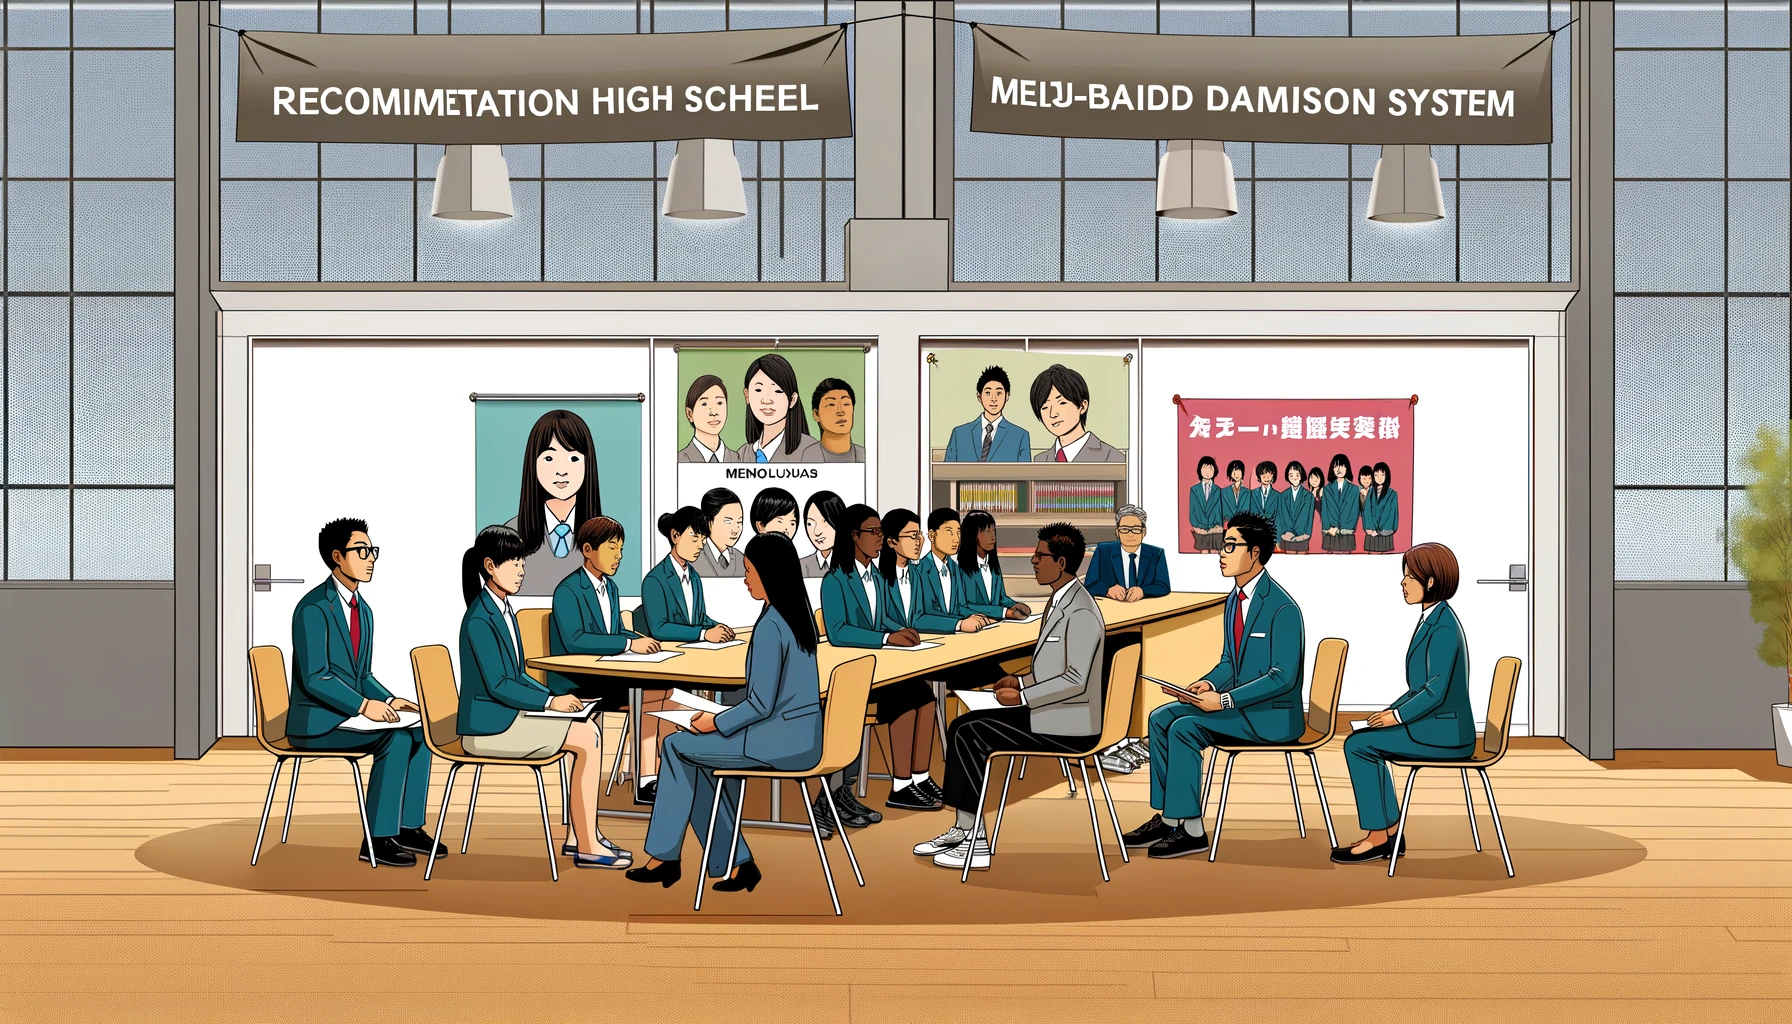 An illustrative scene depicting the recommendation-based admission system at Meiji High School in Japan. The image features a group of prospective students, diverse in appearance, sitting in a modern classroom setting, engaged in an interview process. There are school officials, also diverse, evaluating the students who are presenting their portfolios and achievements. The atmosphere is professional yet welcoming, with banners of the school showcasing its values and achievements hanging in the background. The room is well-lit and decorated with elements that reflect the school's commitment to fostering talent and excellence.